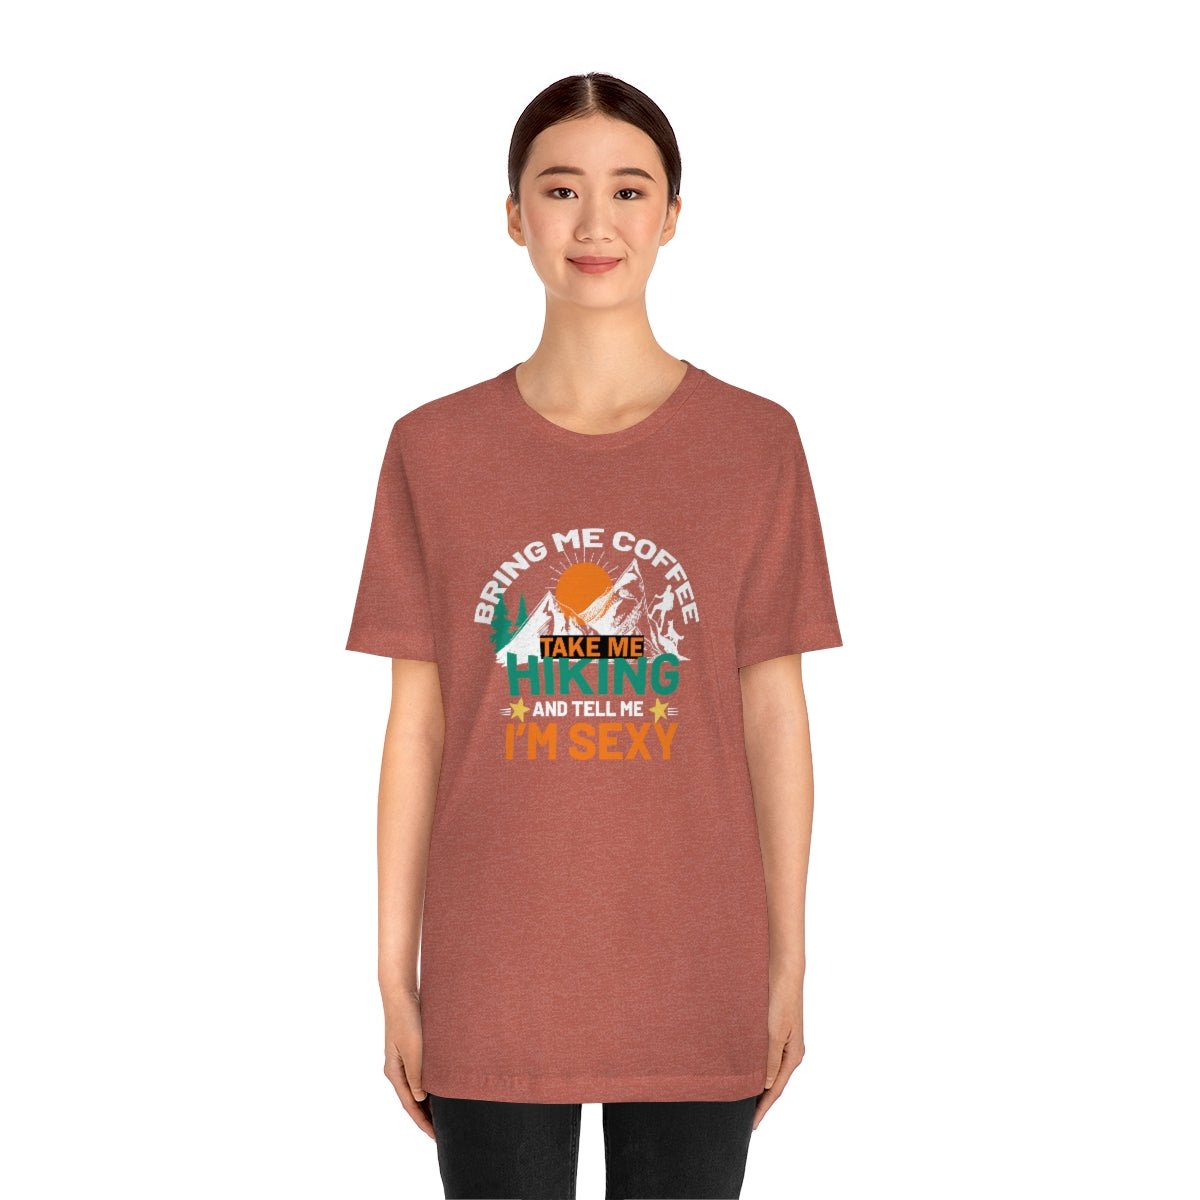 Take me hiking and bring me coffee Women's Short Sleeve Tee - Salty Medic Clothing Co.